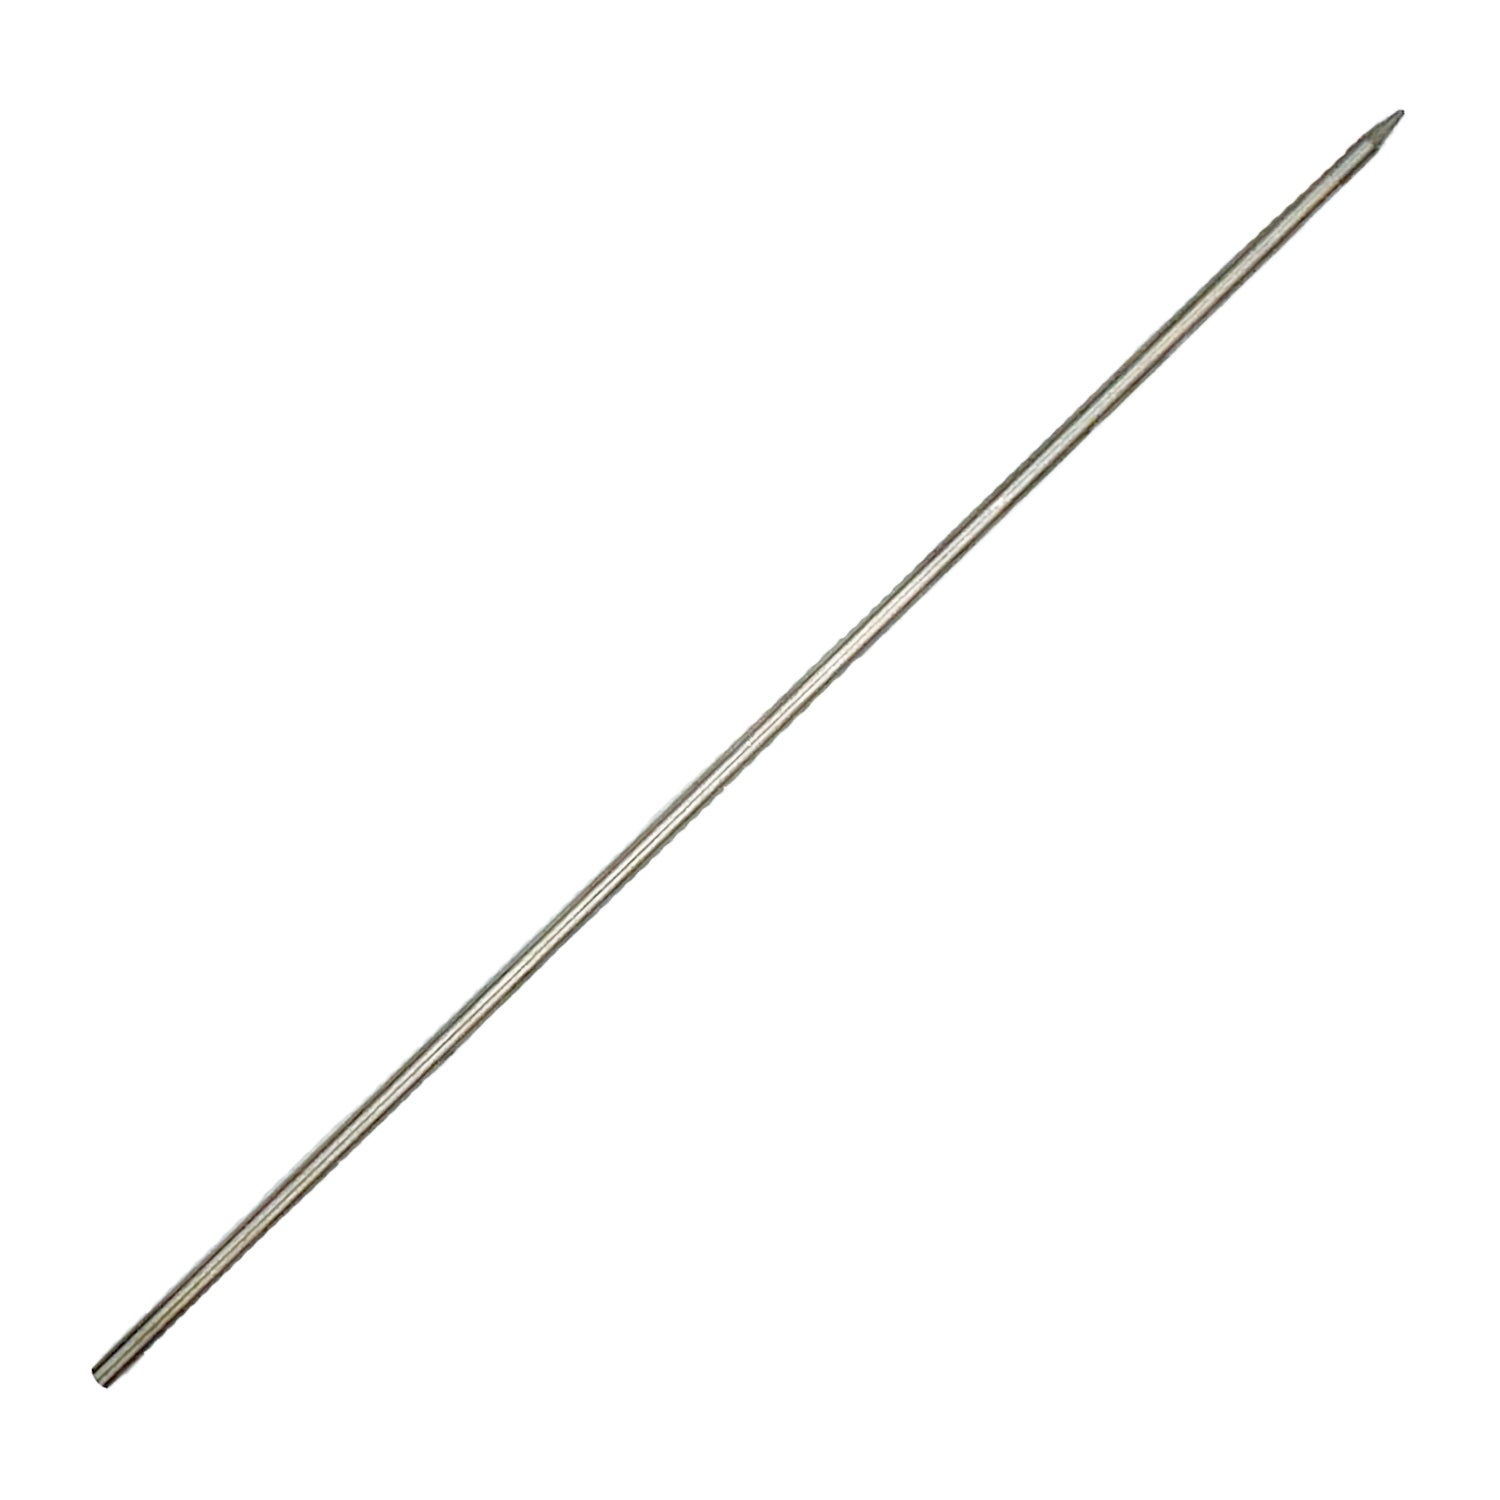 Grounding Rod or Rod Extension for Earthing